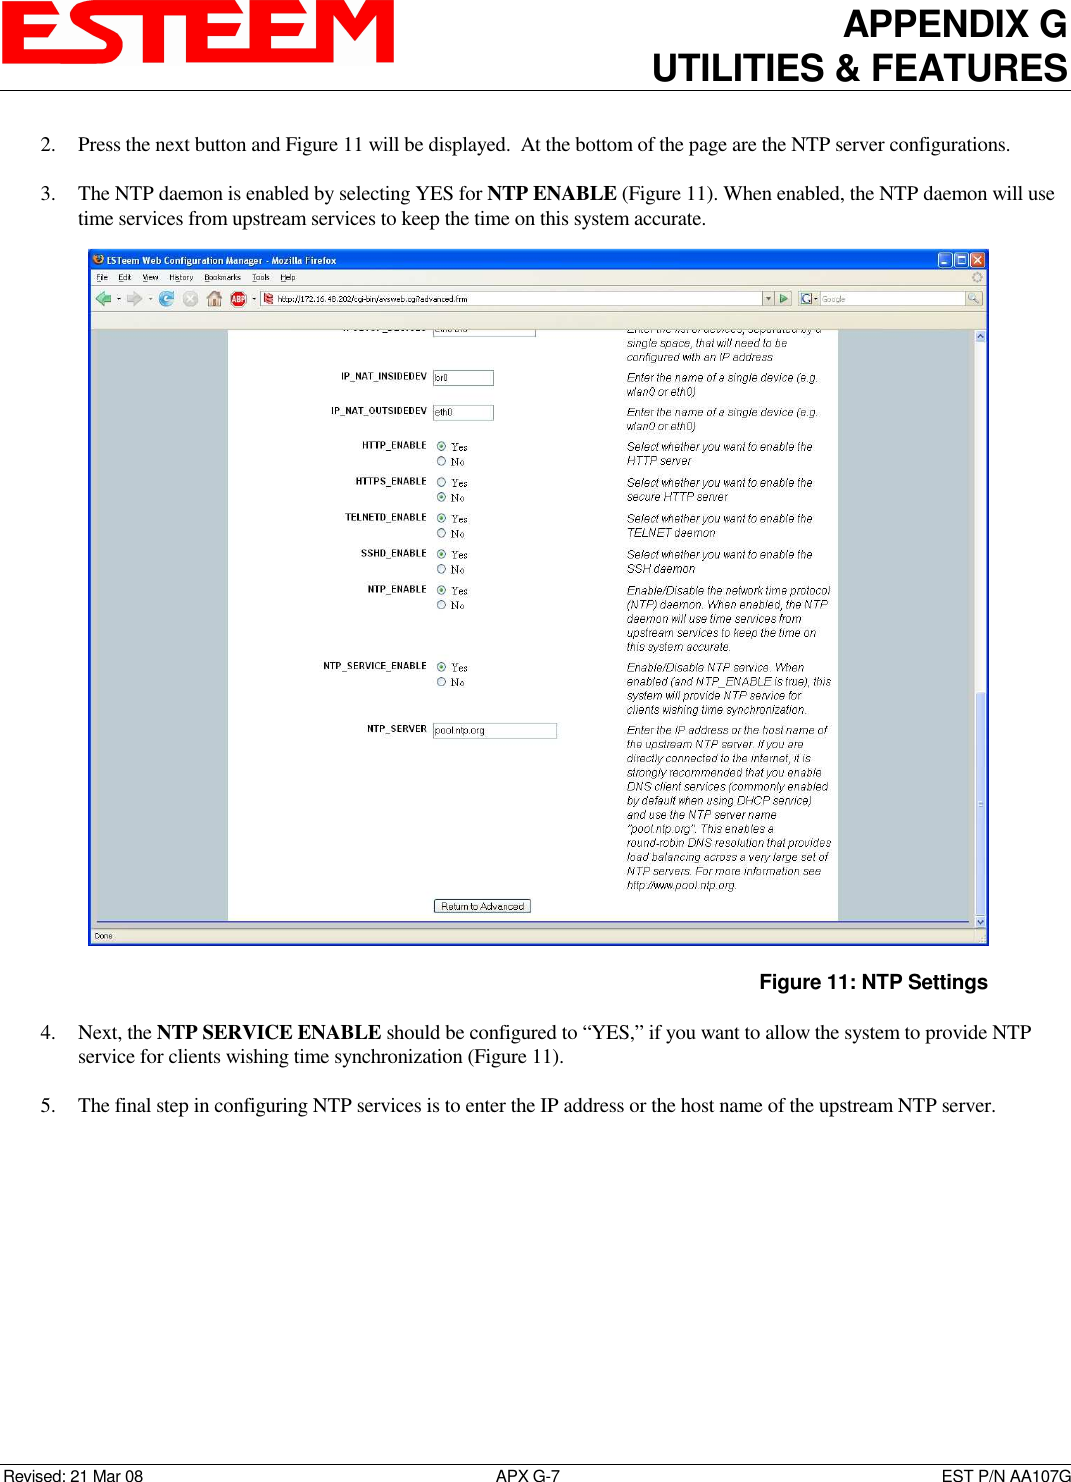 APPENDIX G UTILITIES &amp; FEATURES   Revised: 21 Mar 08  APX G-7  EST P/N AA107G 2. Press the next button and Figure 11 will be displayed.  At the bottom of the page are the NTP server configurations.  3. The NTP daemon is enabled by selecting YES for NTP ENABLE (Figure 11). When enabled, the NTP daemon will use time services from upstream services to keep the time on this system accurate.  4. Next, the NTP SERVICE ENABLE should be configured to “YES,” if you want to allow the system to provide NTP service for clients wishing time synchronization (Figure 11).  5. The final step in configuring NTP services is to enter the IP address or the host name of the upstream NTP server.   Figure 11: NTP Settings 